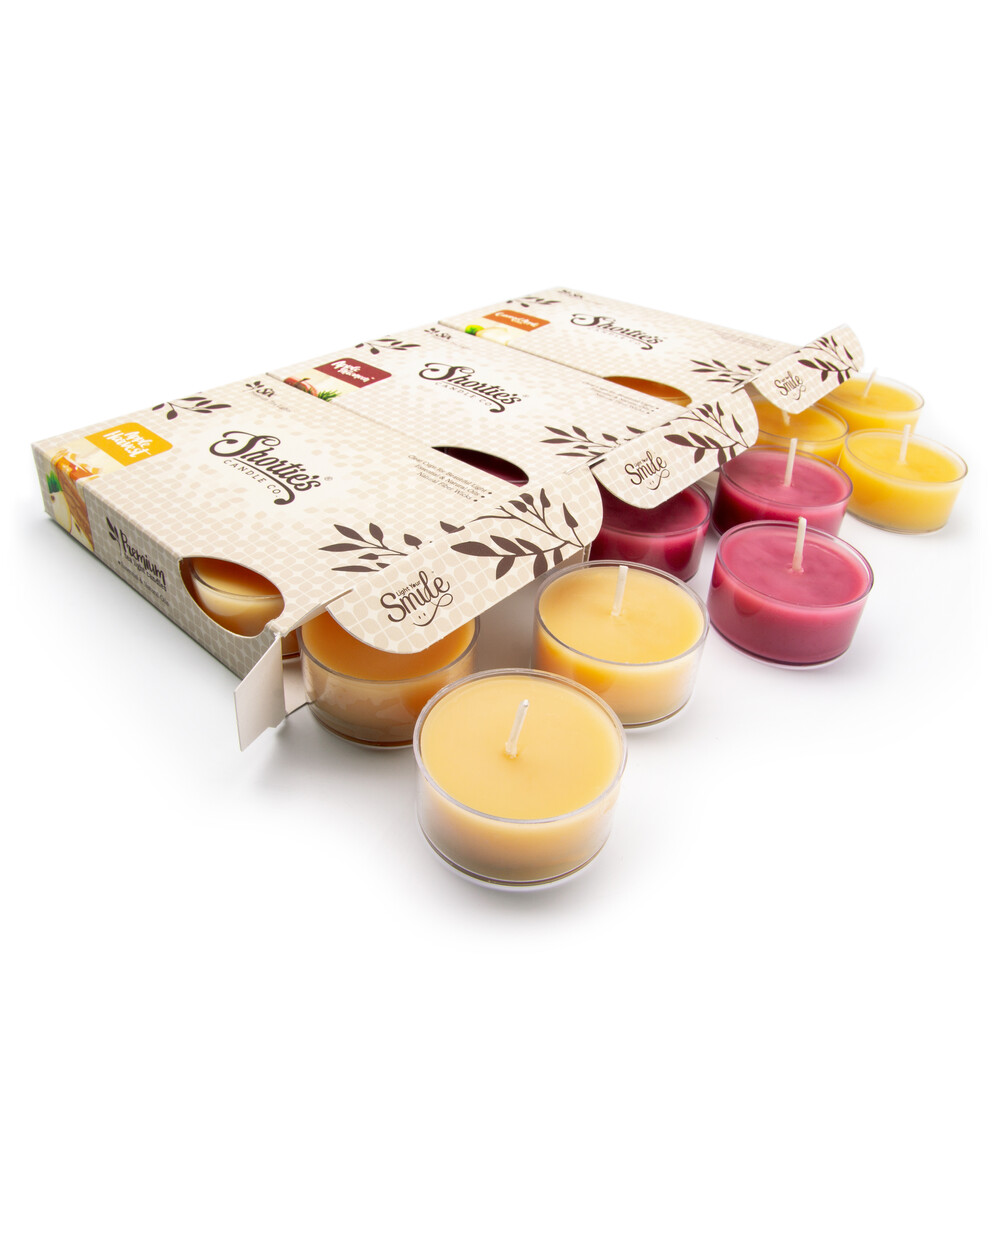 Apple Wax Melts Variety Pack - Formula 117 - Shortie's Candle Company